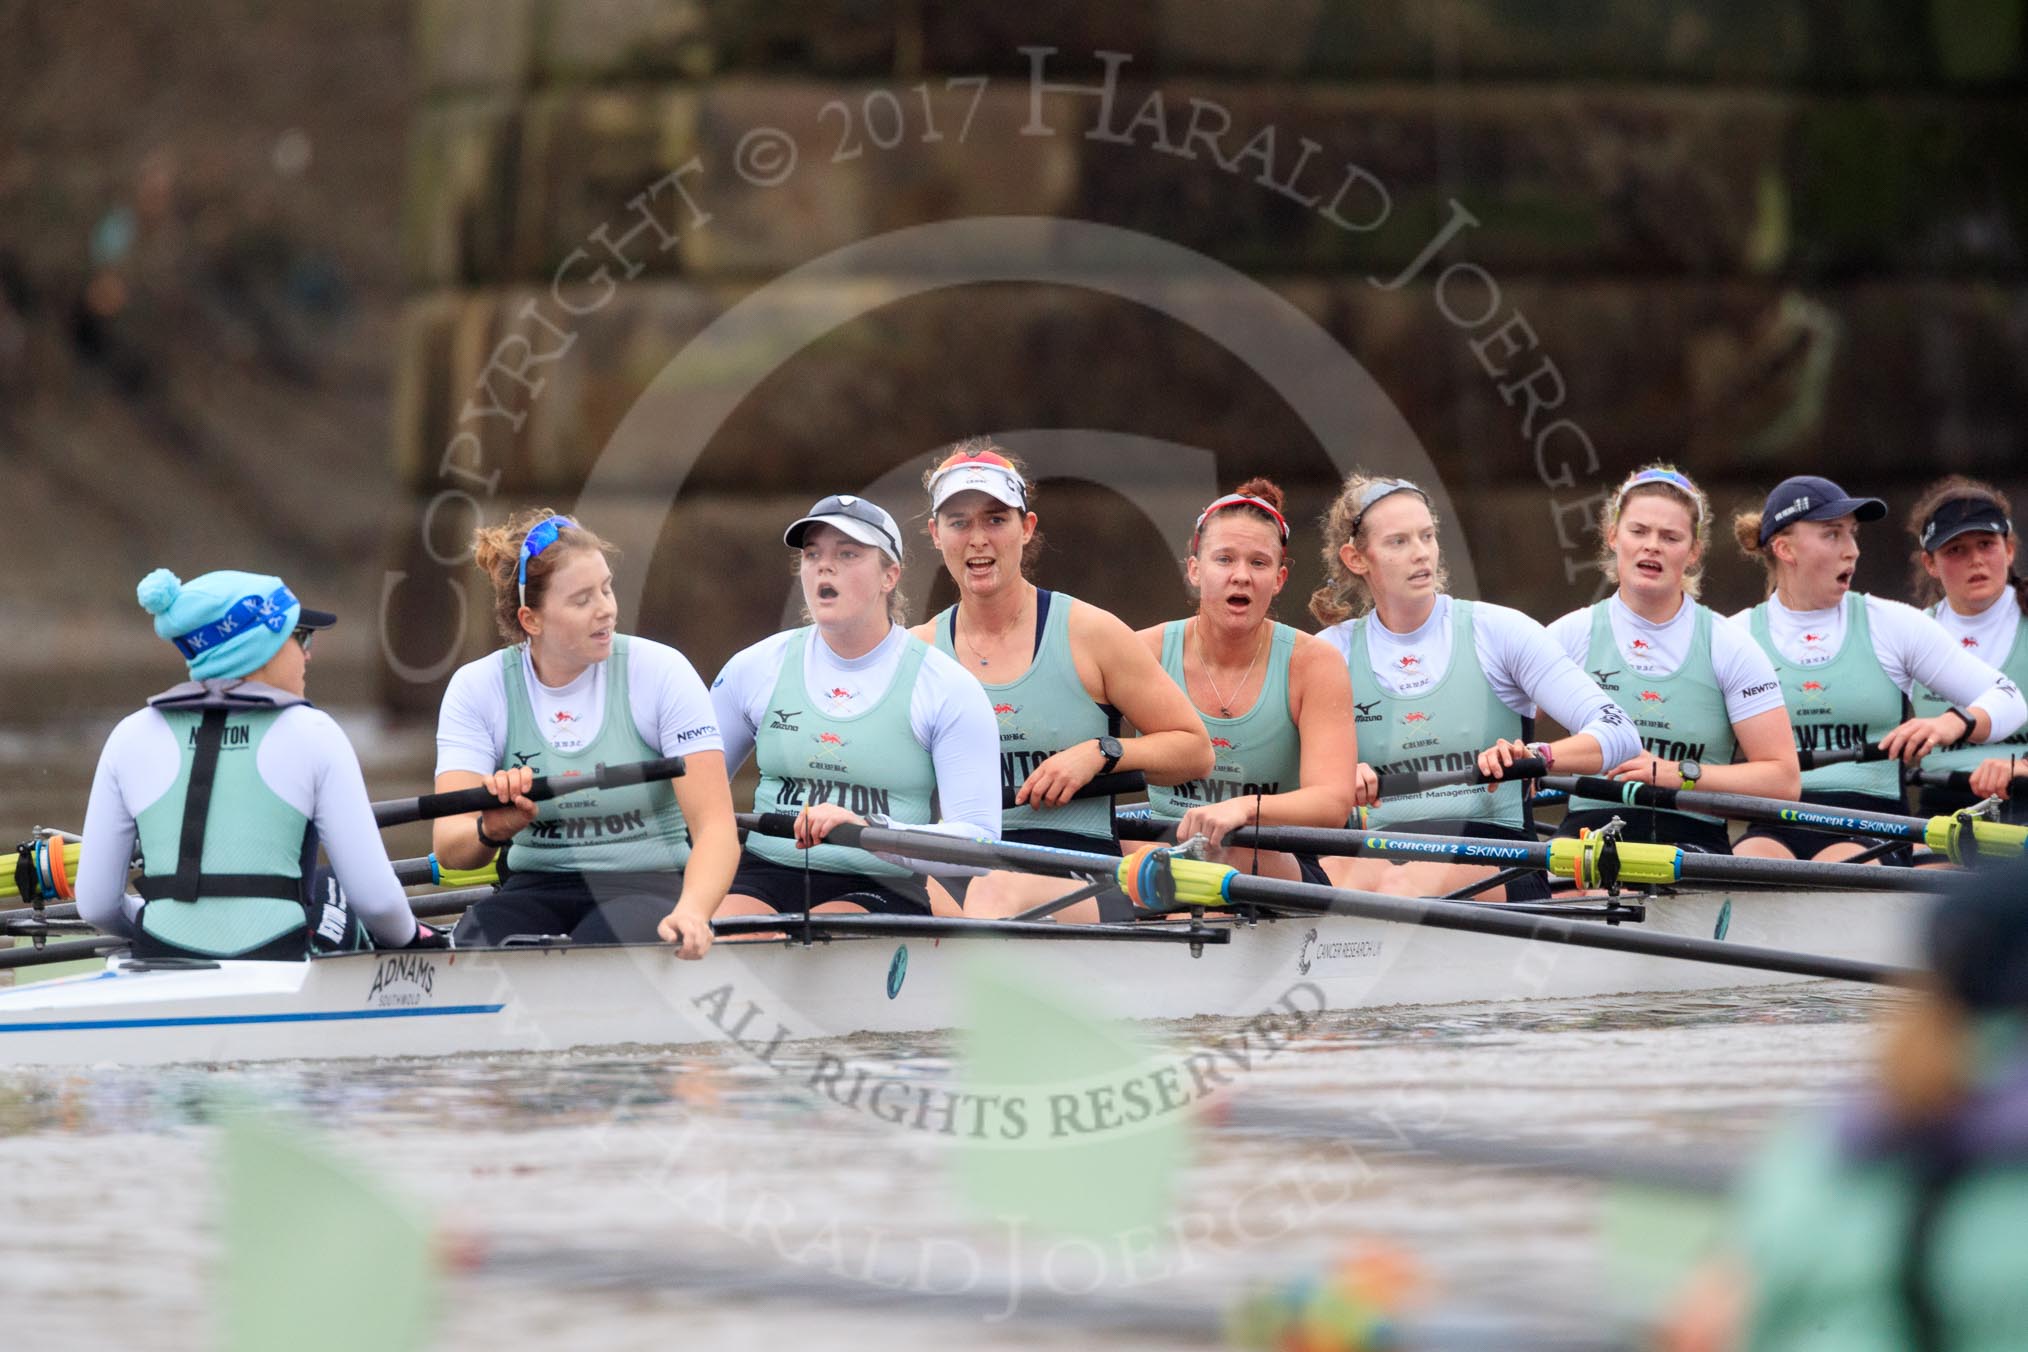 The Boat Race season 2018 - Women's Boat Race Trial Eights (CUWBC, Cambridge): Expecto Patronum:  Cox-Sophie Shapter, stroke-Alice White,  7-Abigail Parker, 6-Thea Zabell, 5-Kelsey Barolak, 4-Laura Foster, 3-Sally O Brien, 2-Millie Perrin, bow-Eve Caroe.
River Thames between Putney Bridge and Mortlake,
London SW15,

United Kingdom,
on 05 December 2017 at 13:02, image #173